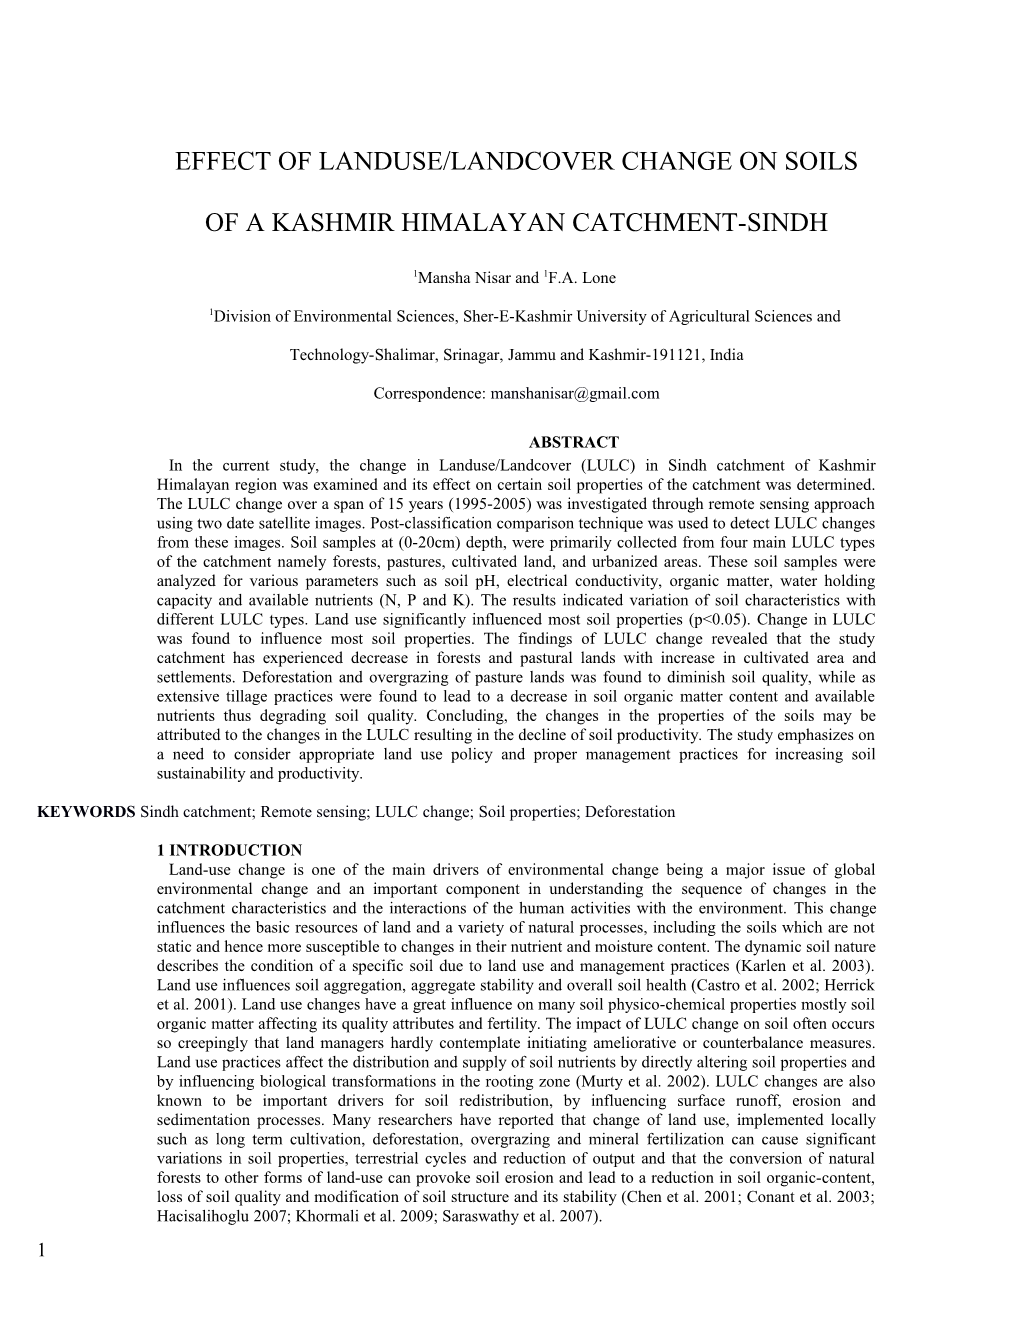 Effect of Landuse/Landcover Change on Soils of a Kashmir Himalayan Catchment-Sindh